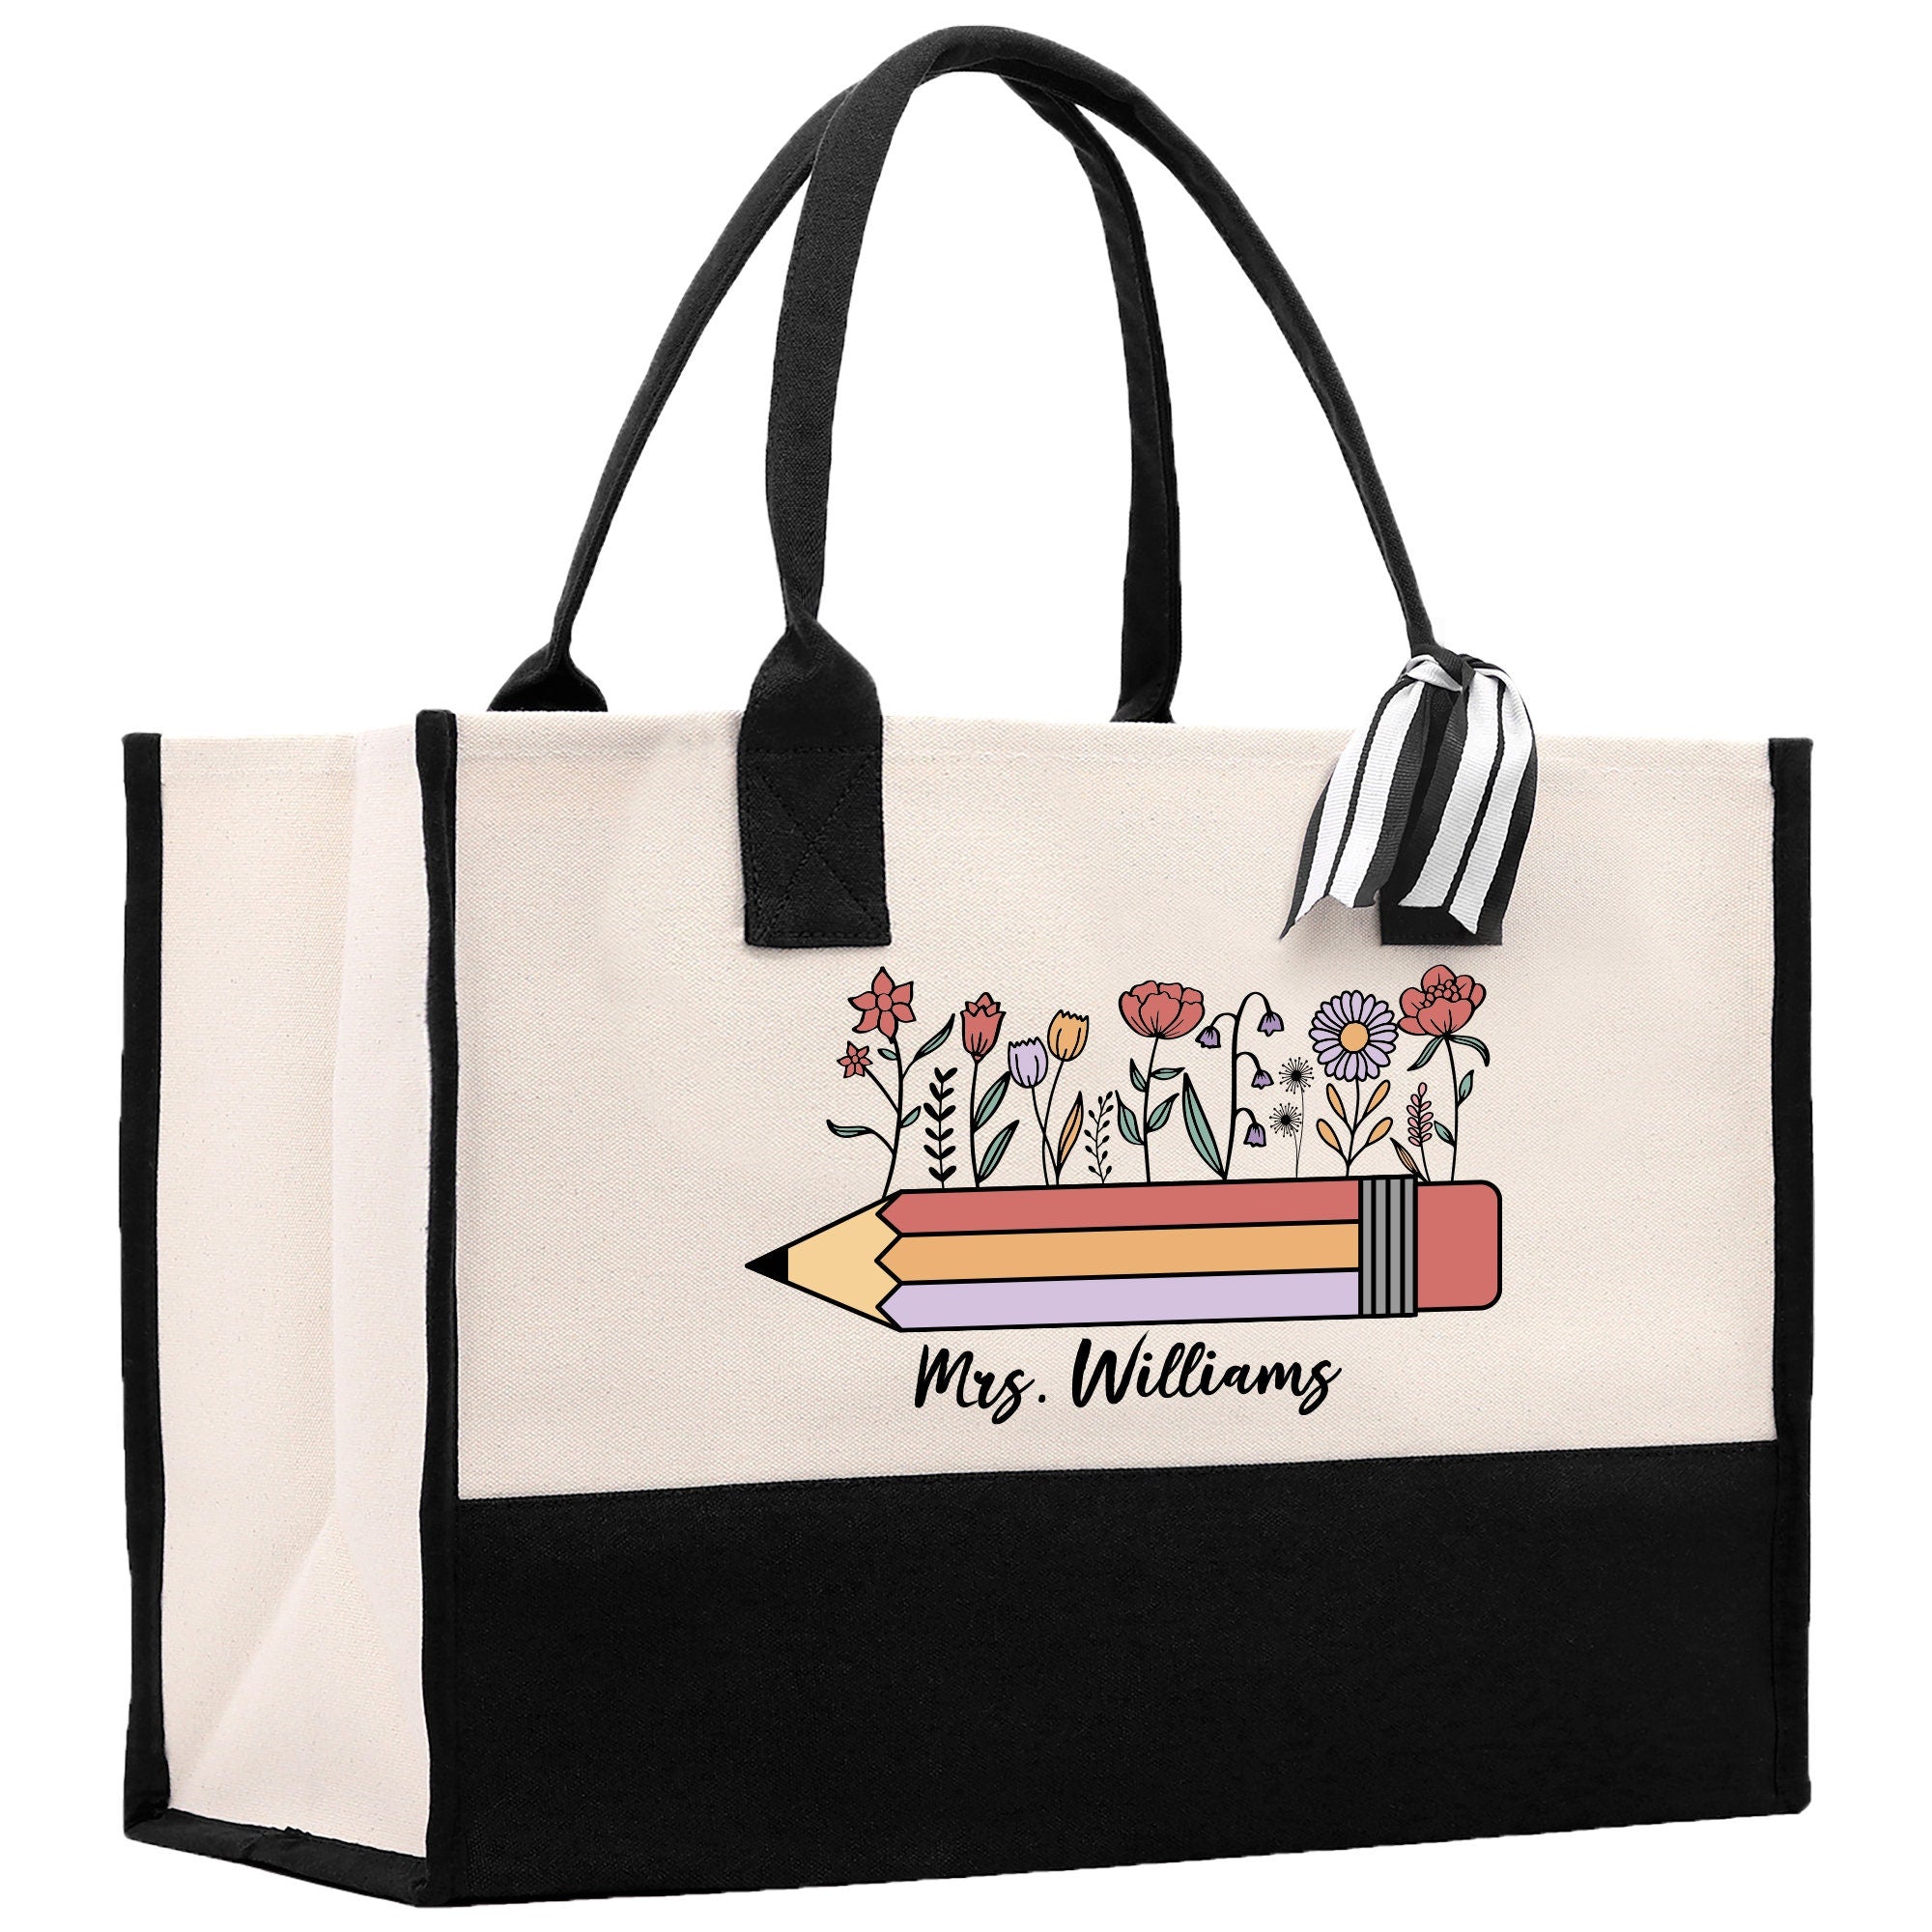 a black and white bag with a pencil and flowers on it